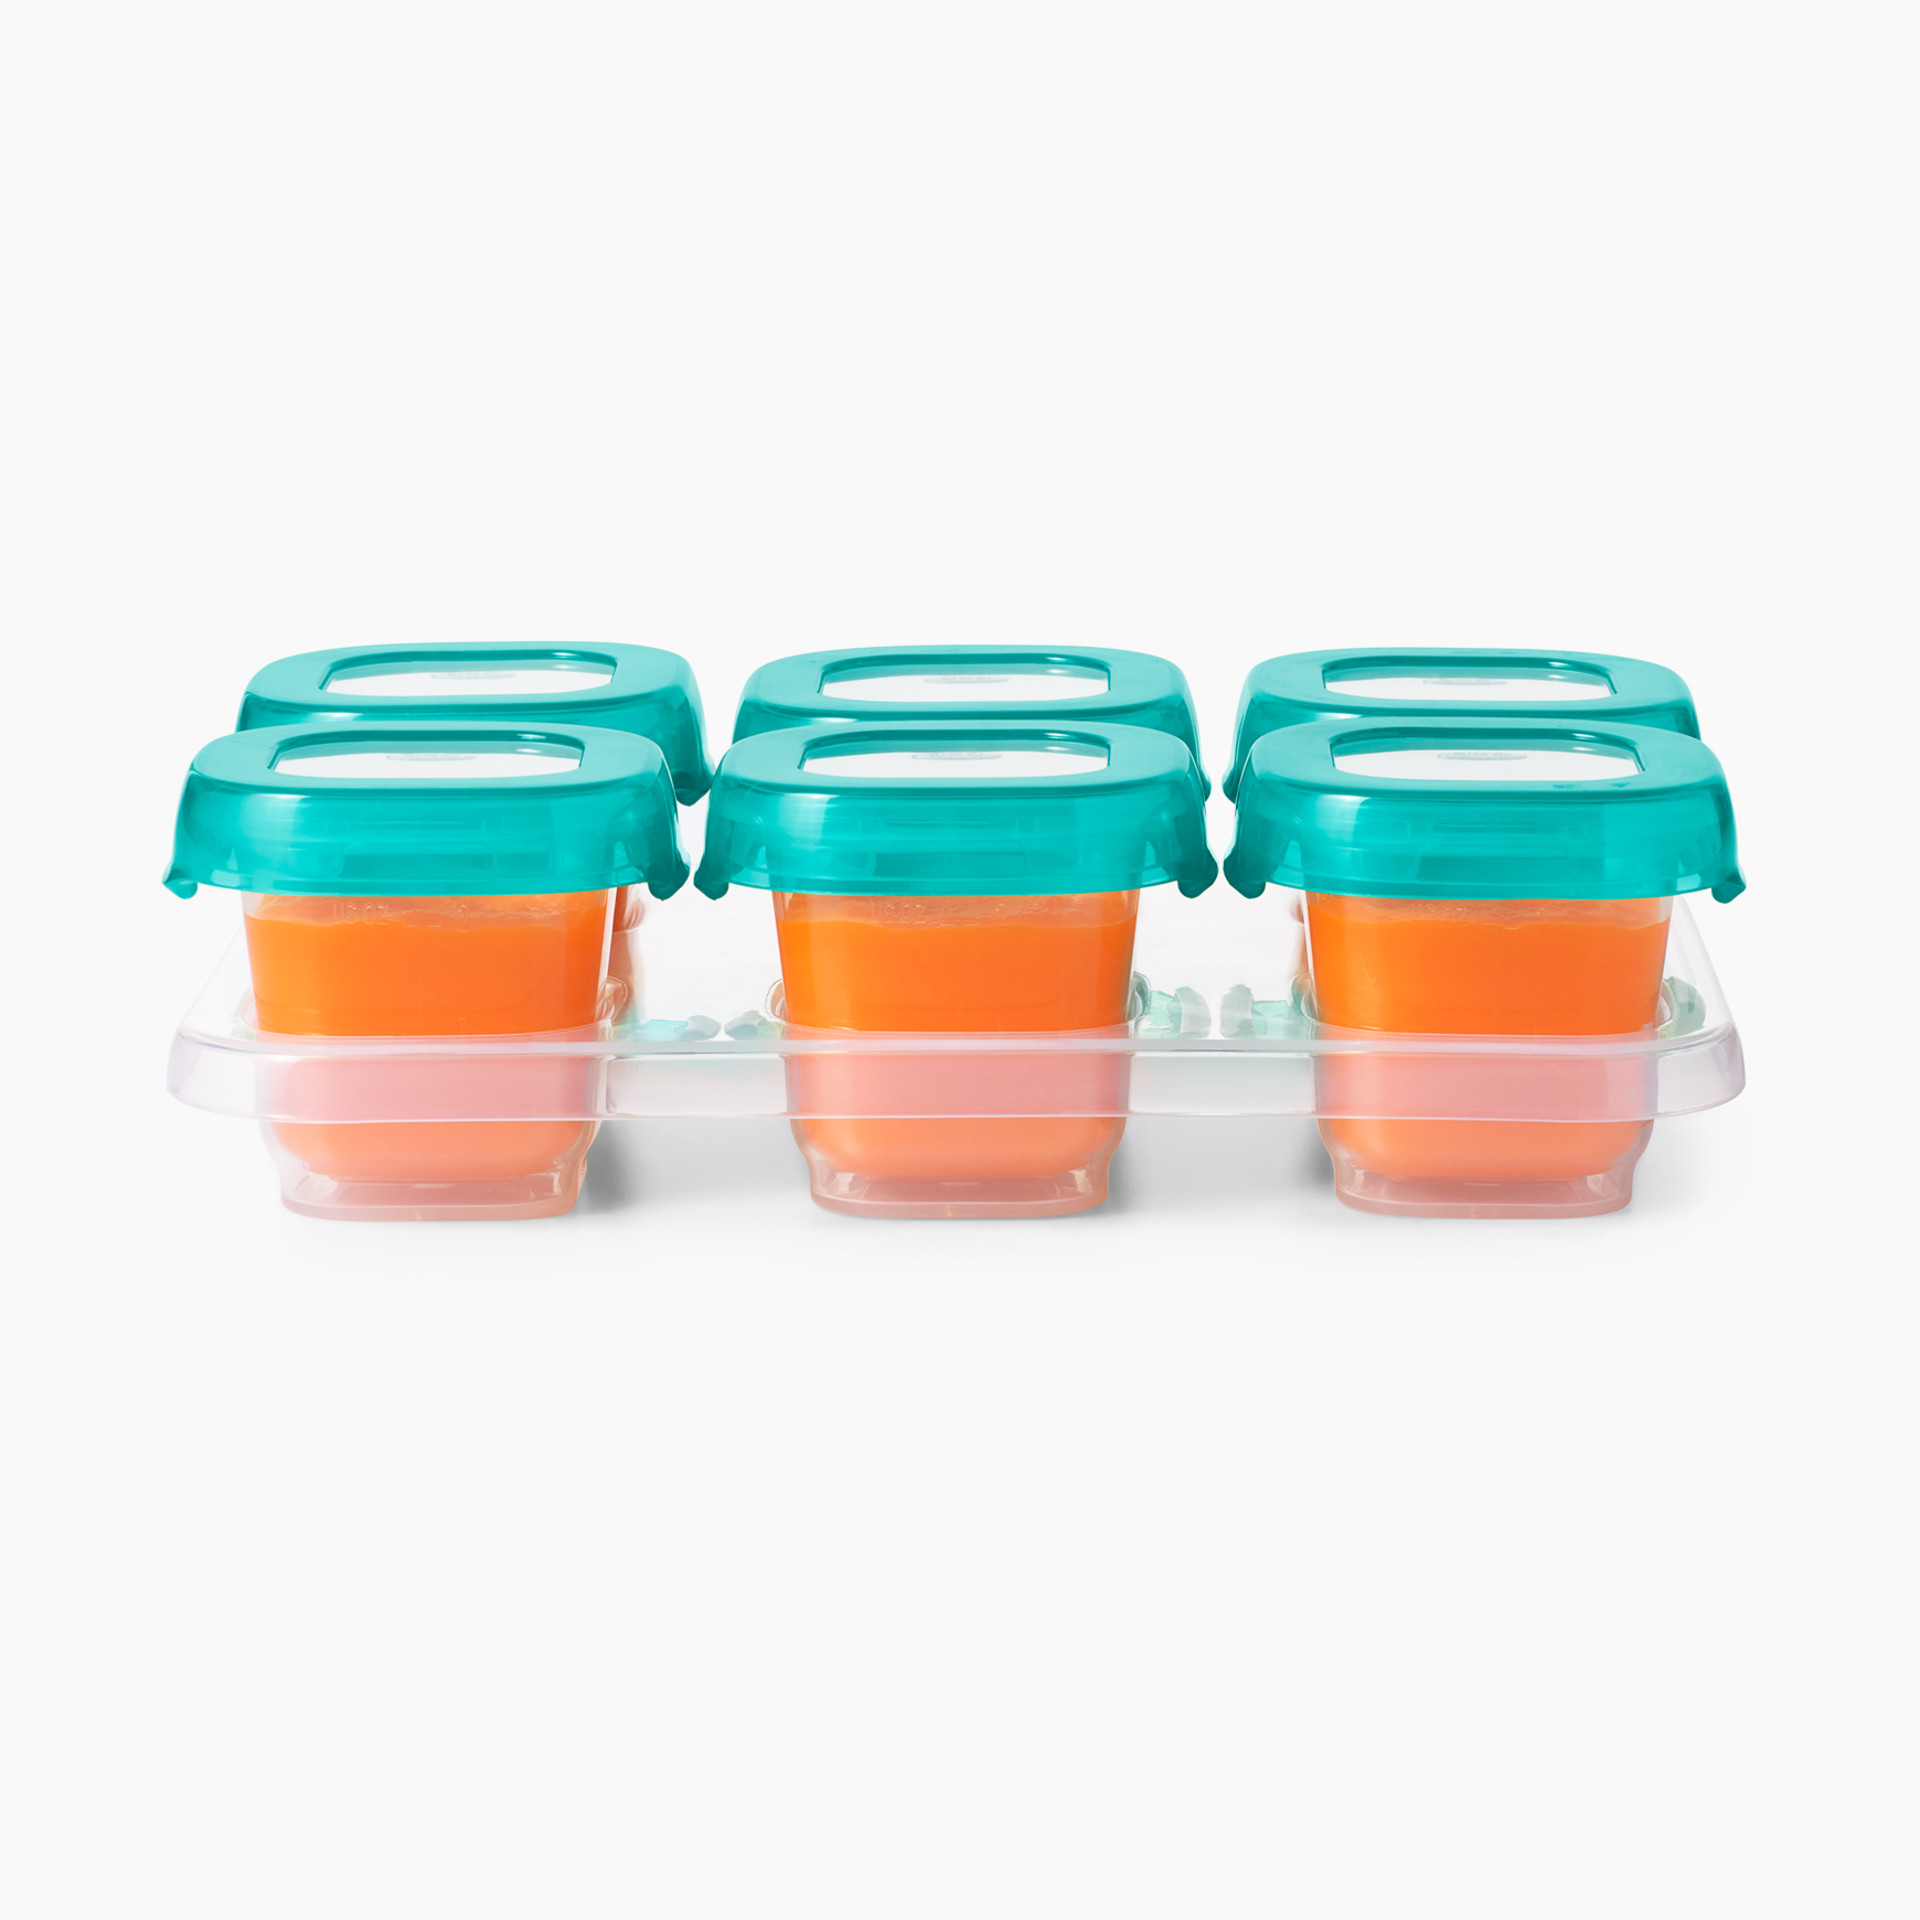 OXO Tot Baby Blocks 2oz Freezer Storage Containers - Teal, 1